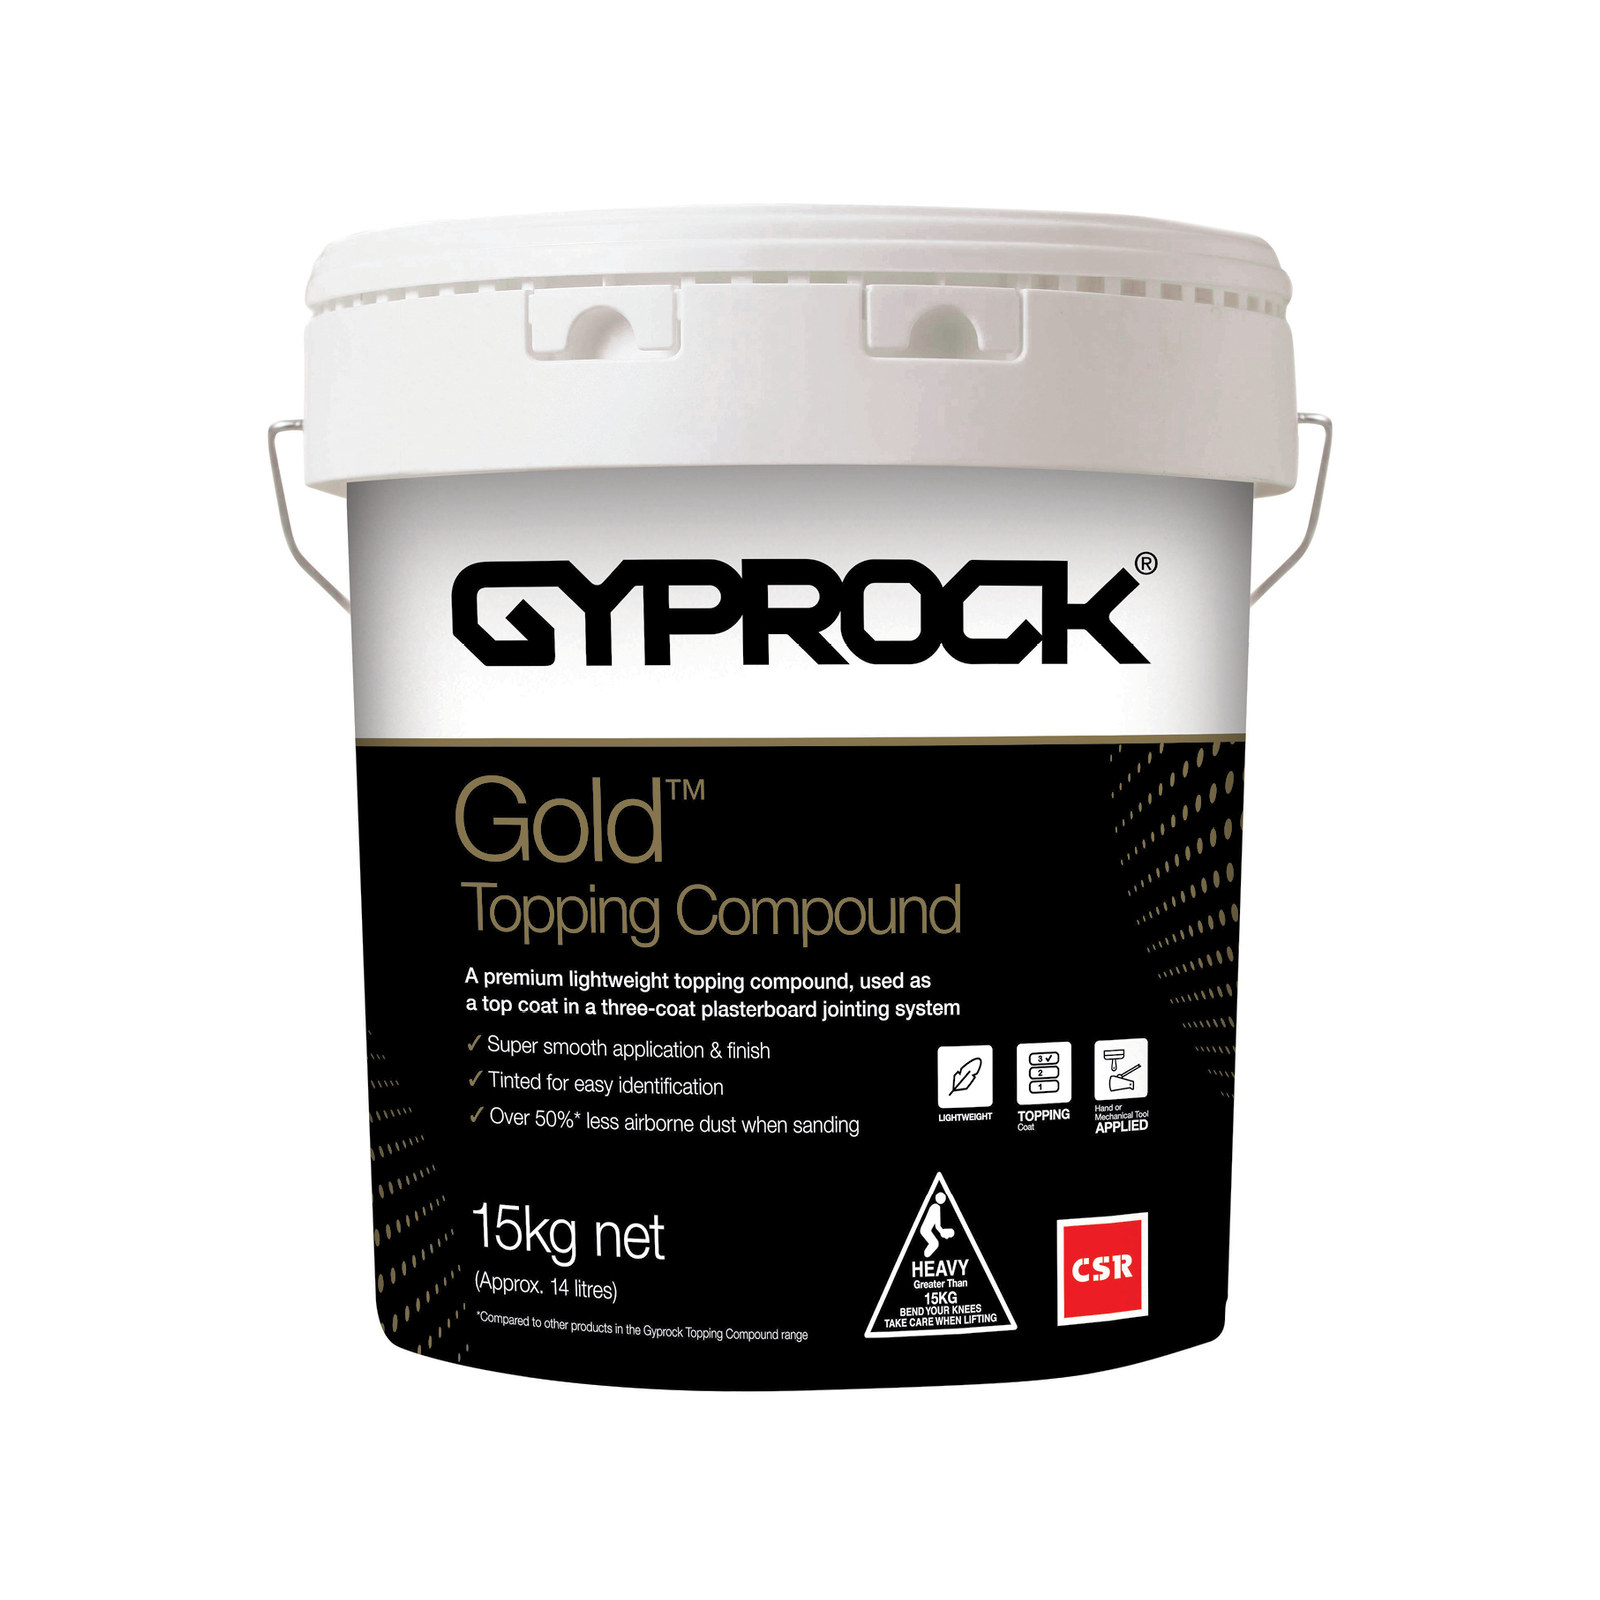 Gyprock 15kg Gold Topping Compound Bunnings Australia